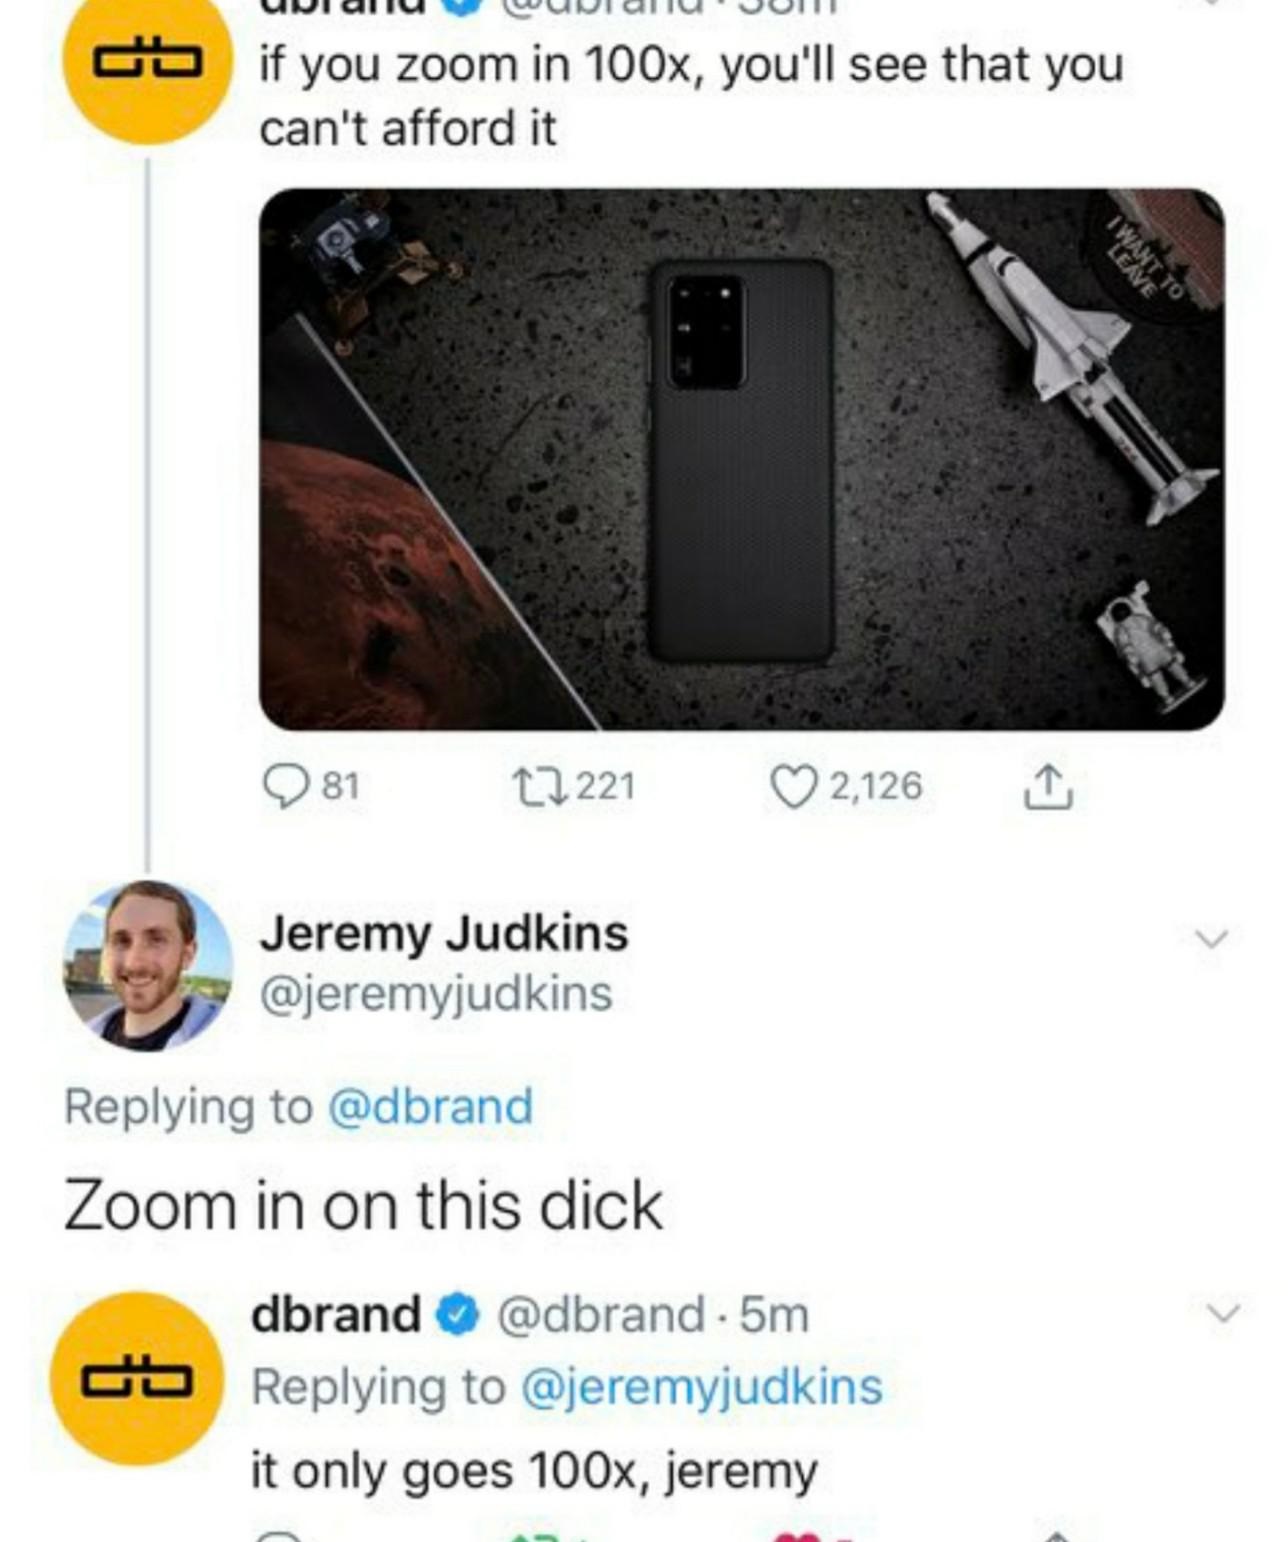 electronics - Uwi alluvun alu'Juht if you zoom in 100x, you'll see that you can't afford it 81 22221 2,126 1 Jeremy Judkins Zoom in on this dick dbrand . 5m it only goes 100x, jeremy